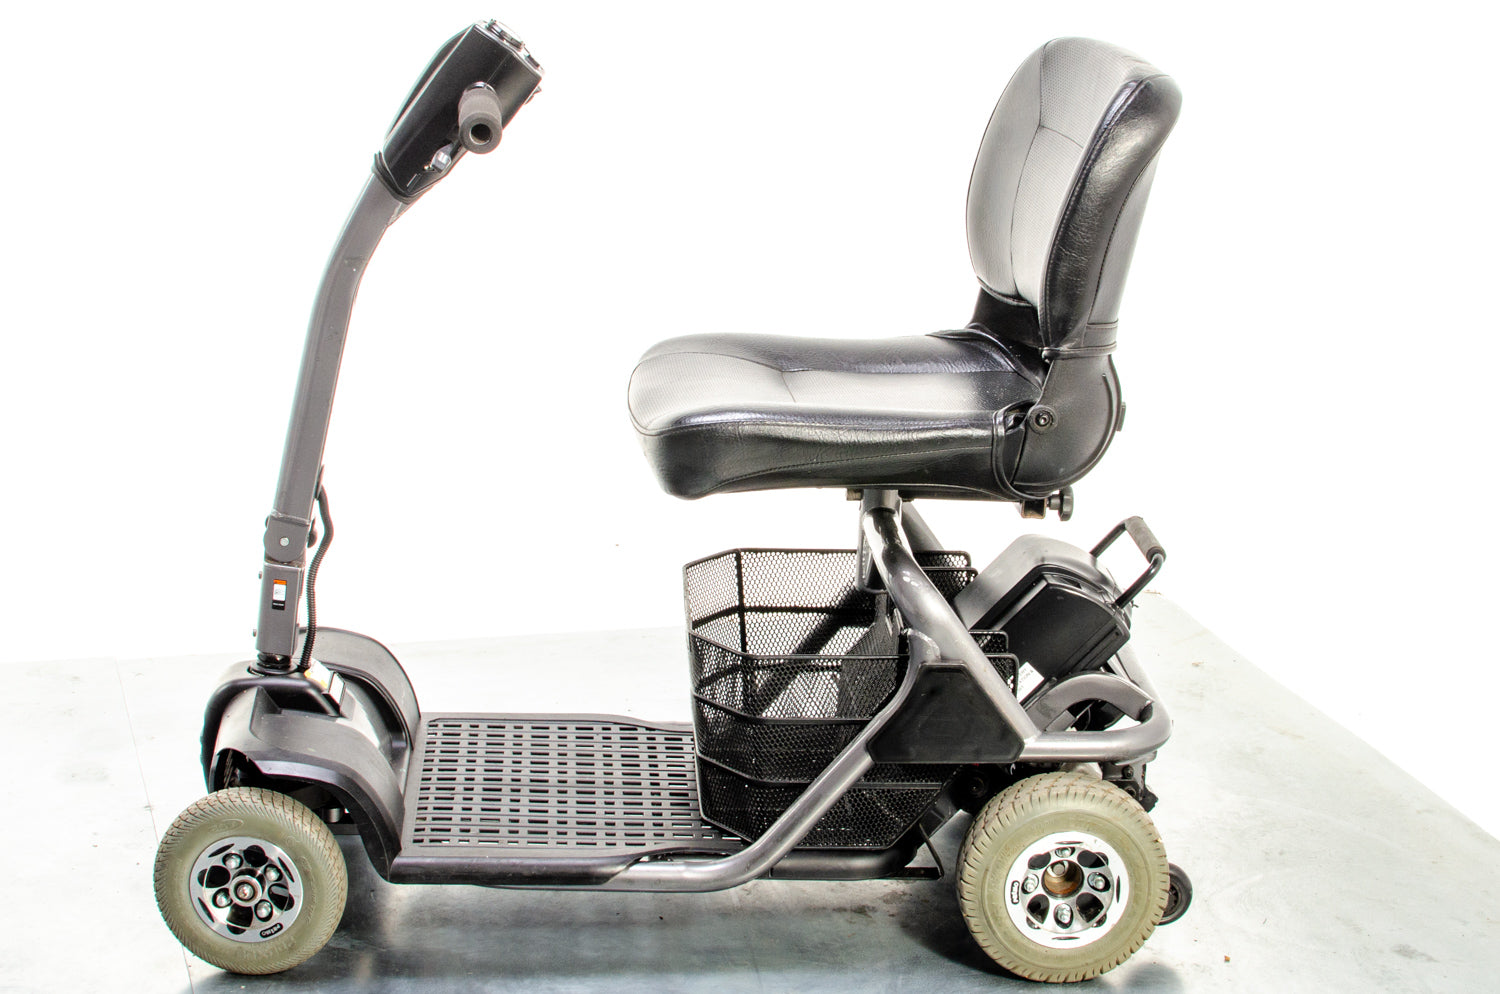 Rascal Liteway 4 Used Electric Mobility Scooter Transportable Boot Travel Lightweight tubular frame